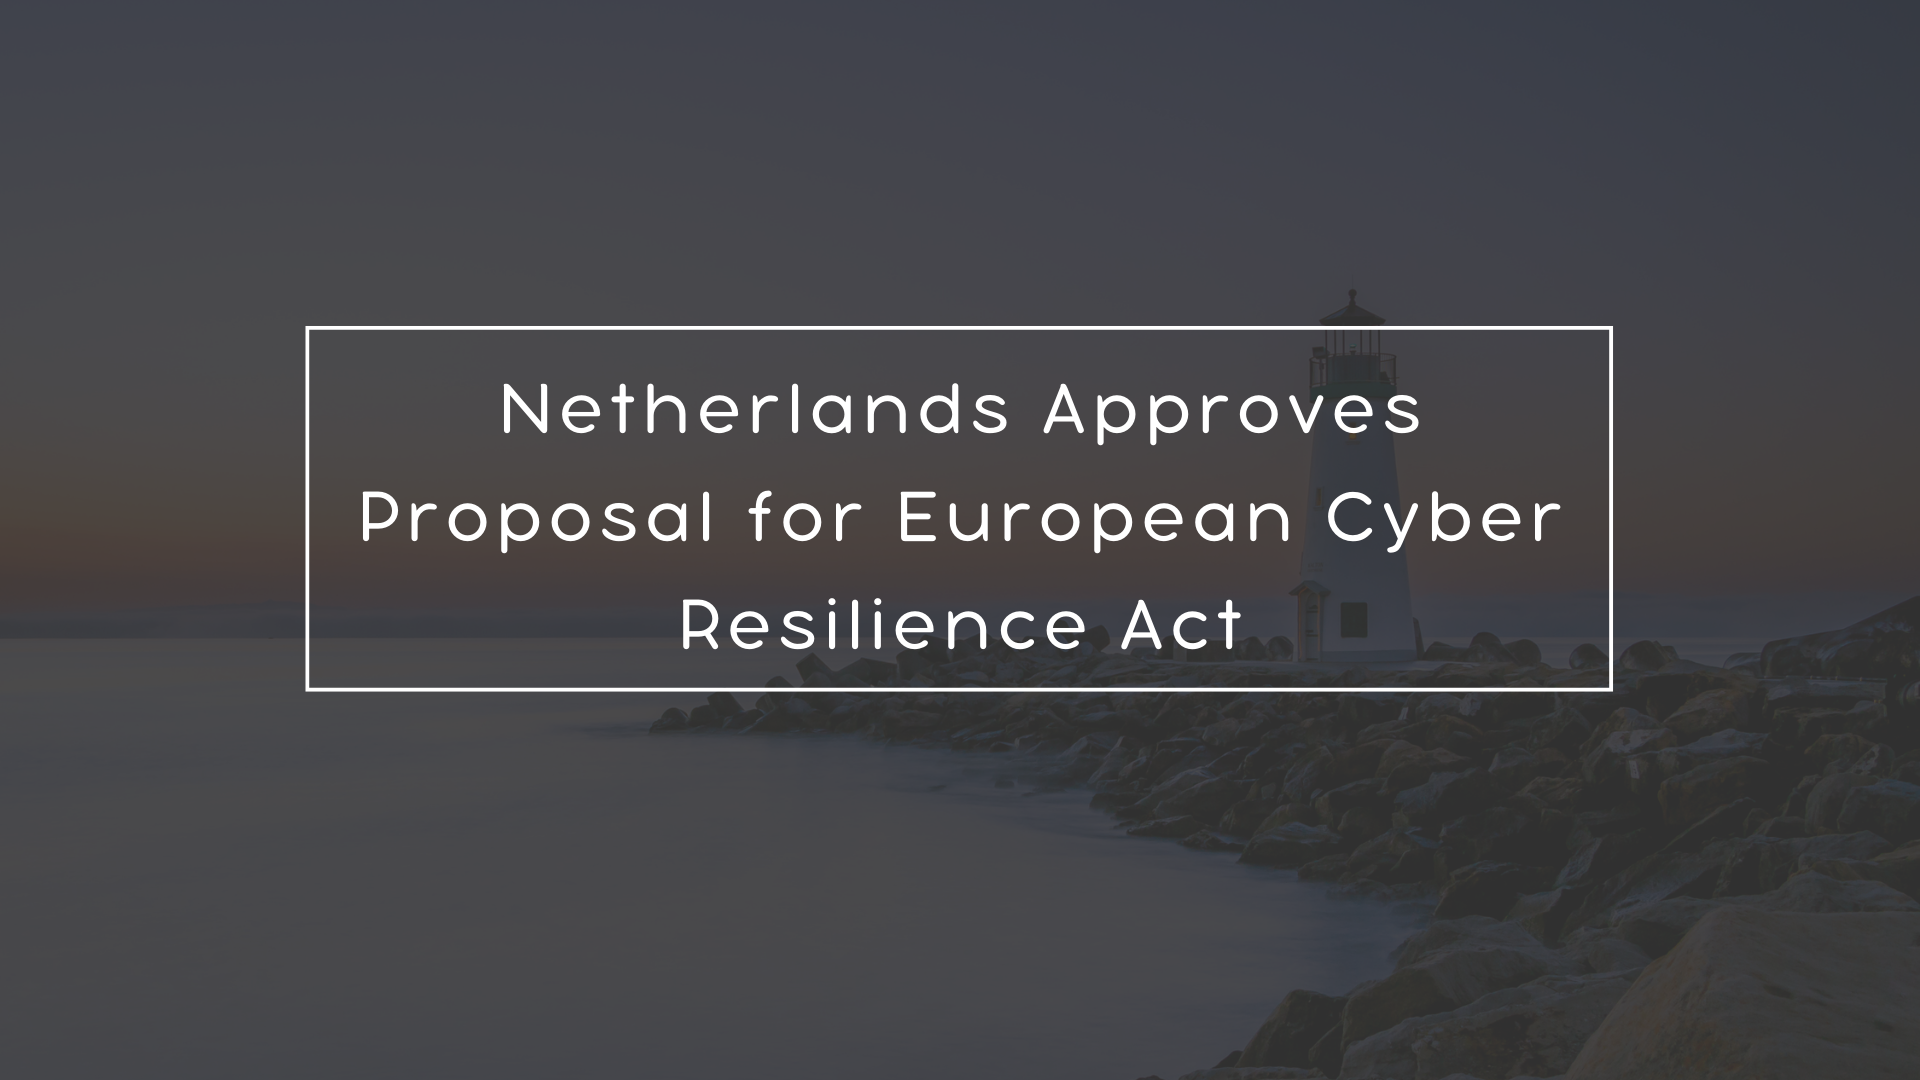 Netherlands Approves Proposal for European Cyber Resilience Act